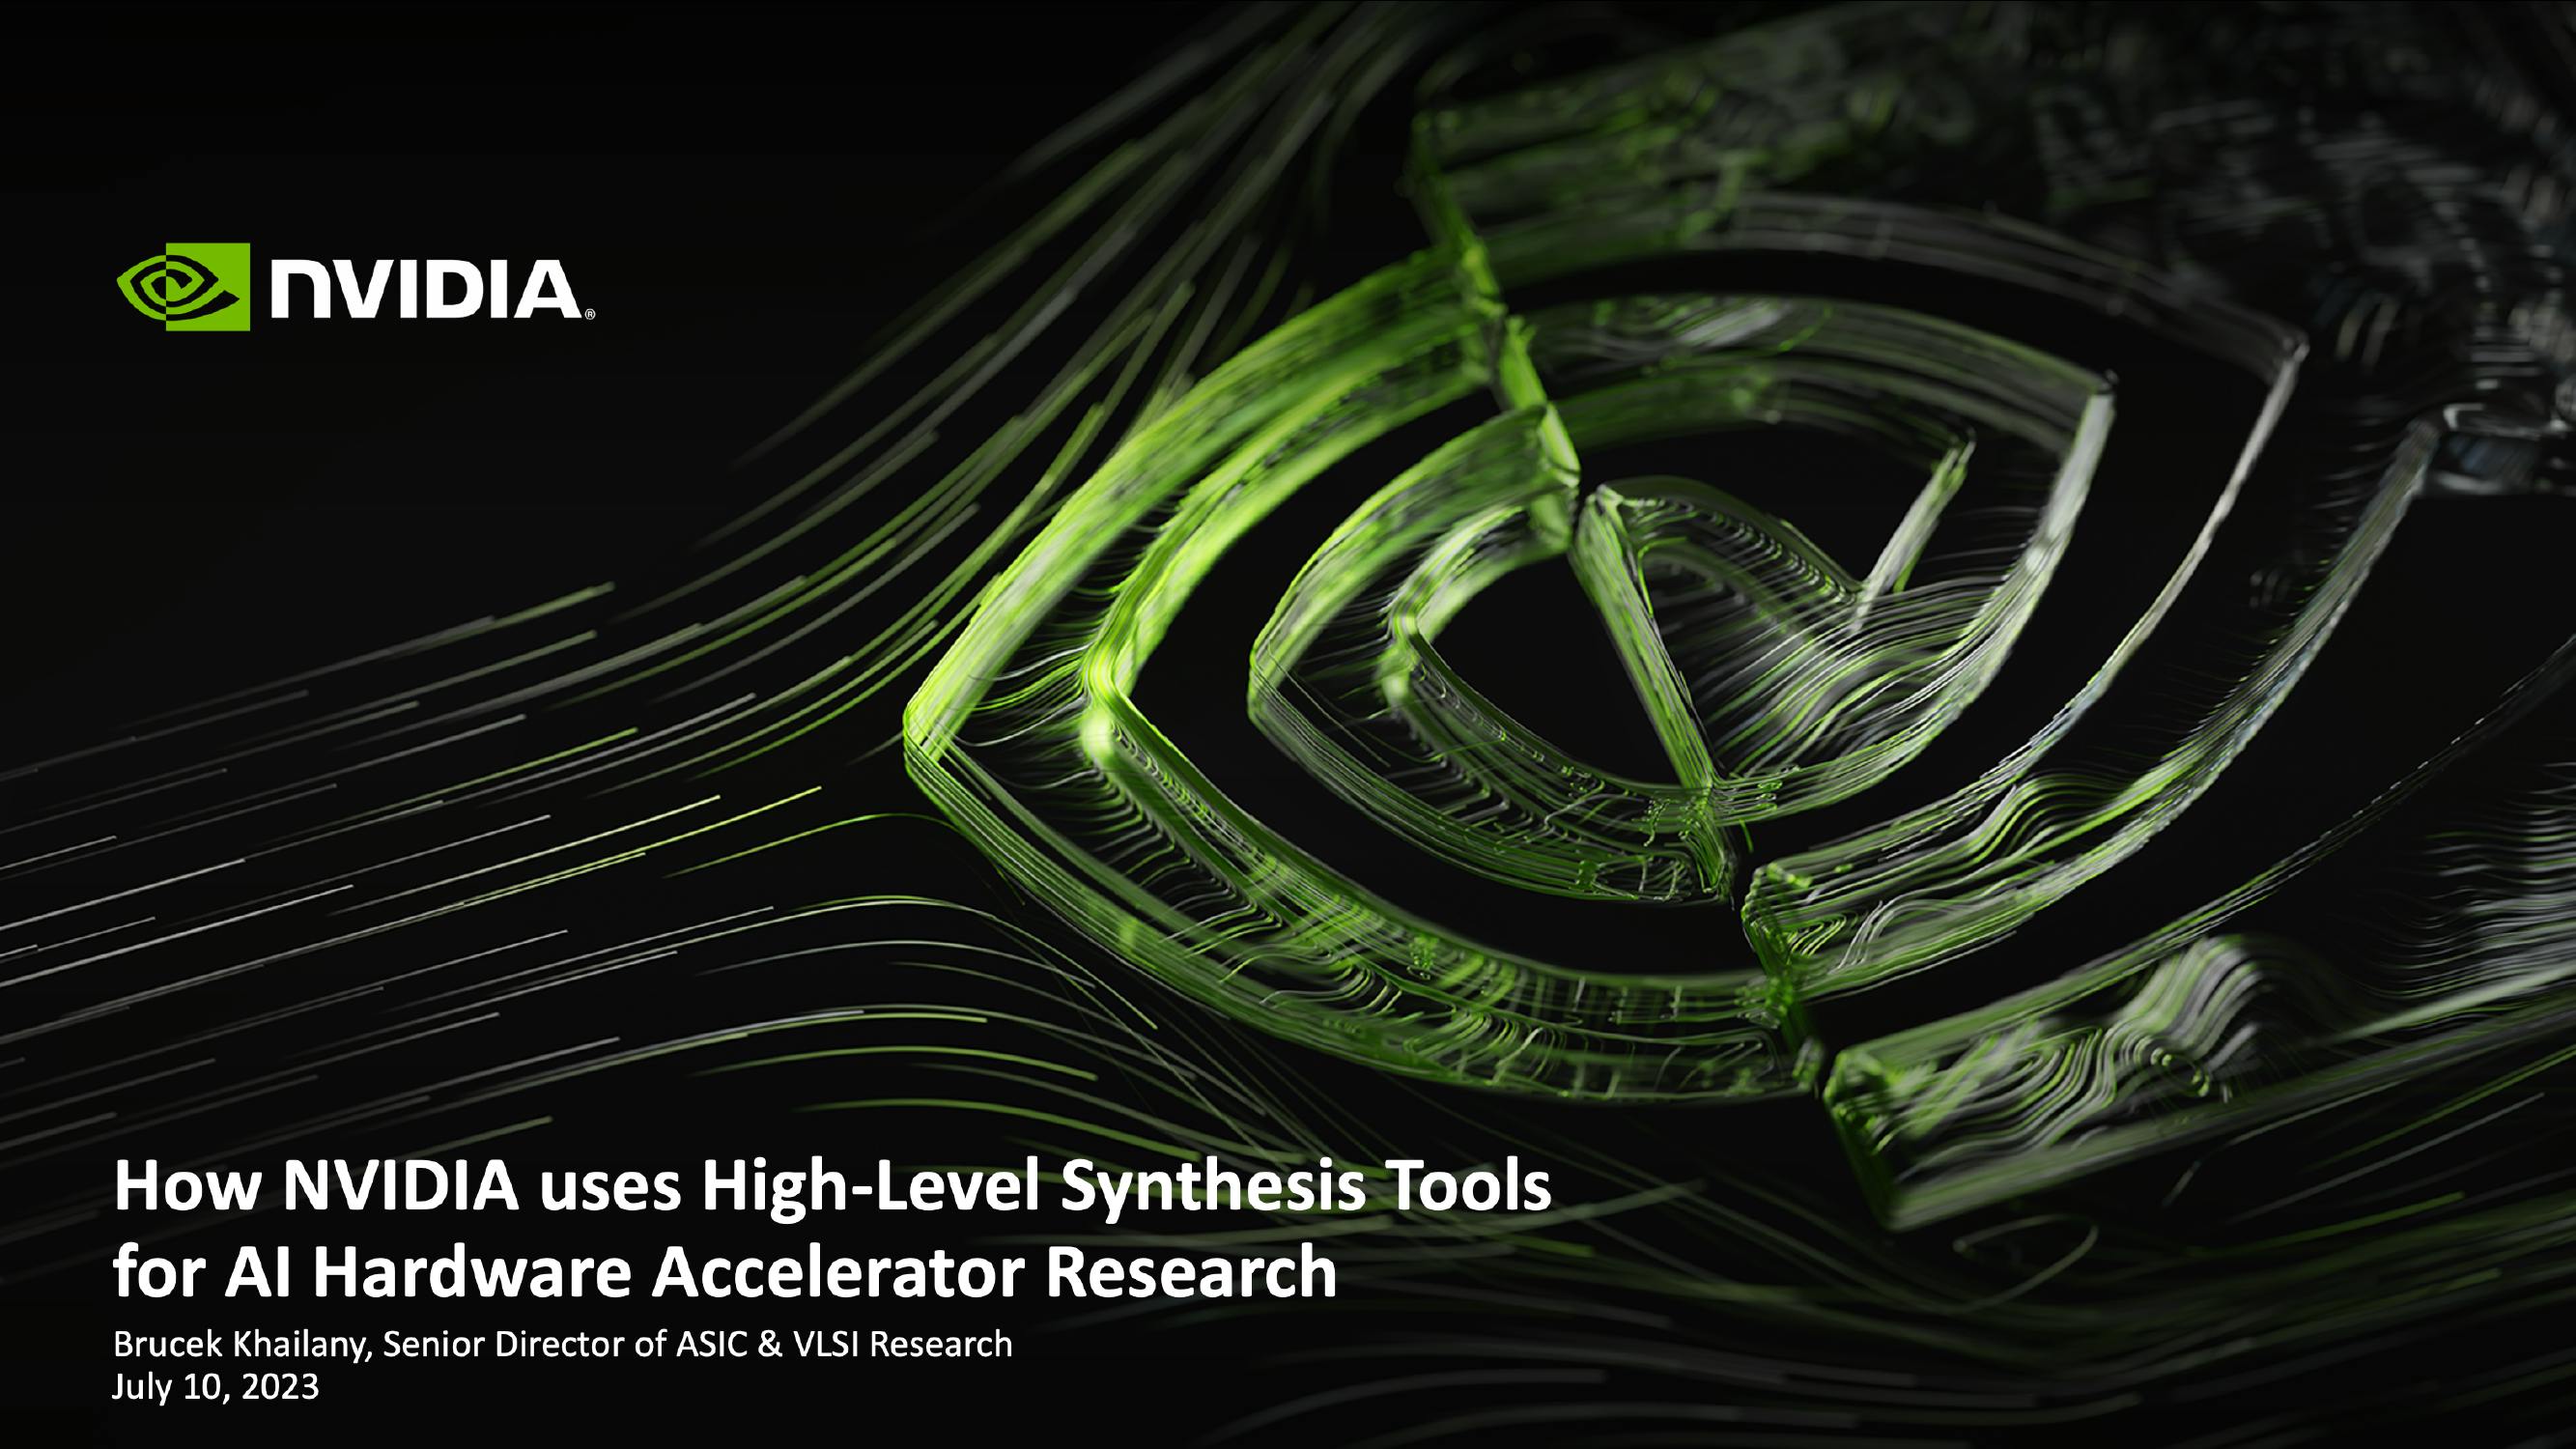 To keep up with the rapid pace of change in AI/ML workloads, NVIDIA Research leverages a High-Level Synthesis (HLS) based design methodology based off SystemC and libraries like MatchLib for maximizing code reuse and minimizing design verification effort.